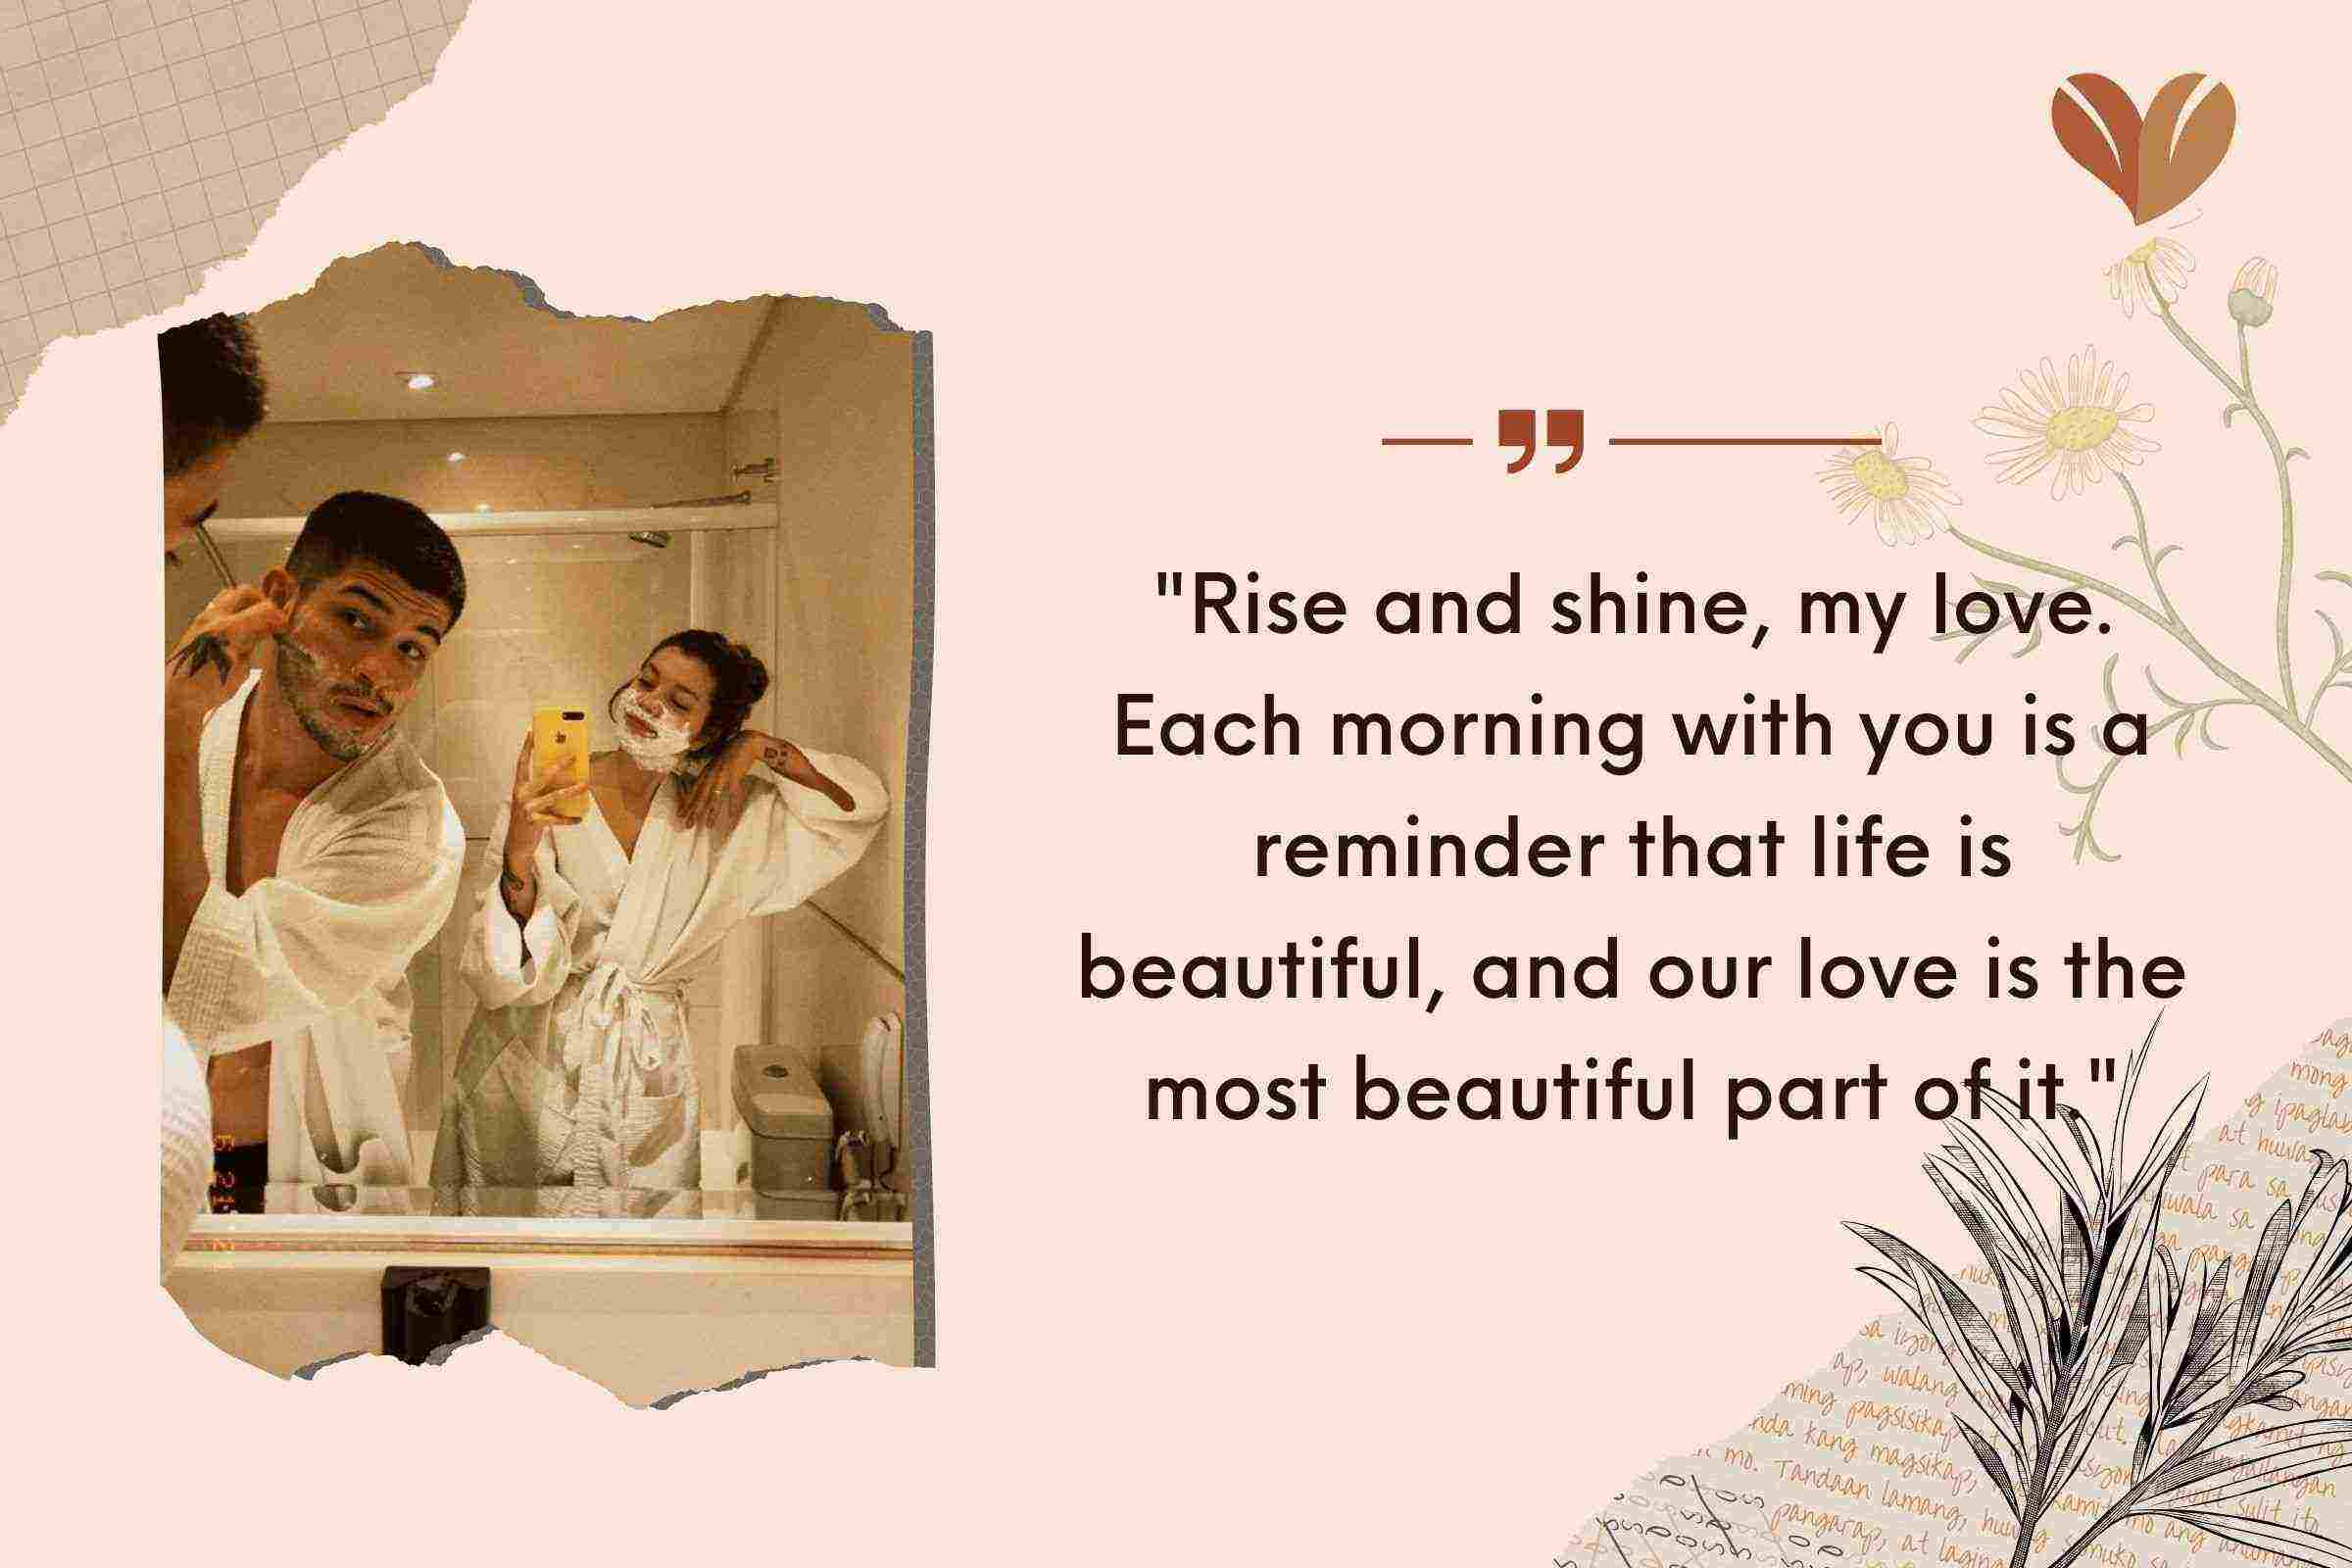 "Rise and shine, my love. Each morning with you is a reminder that life is beautiful, and our love is the most beautiful part of it."